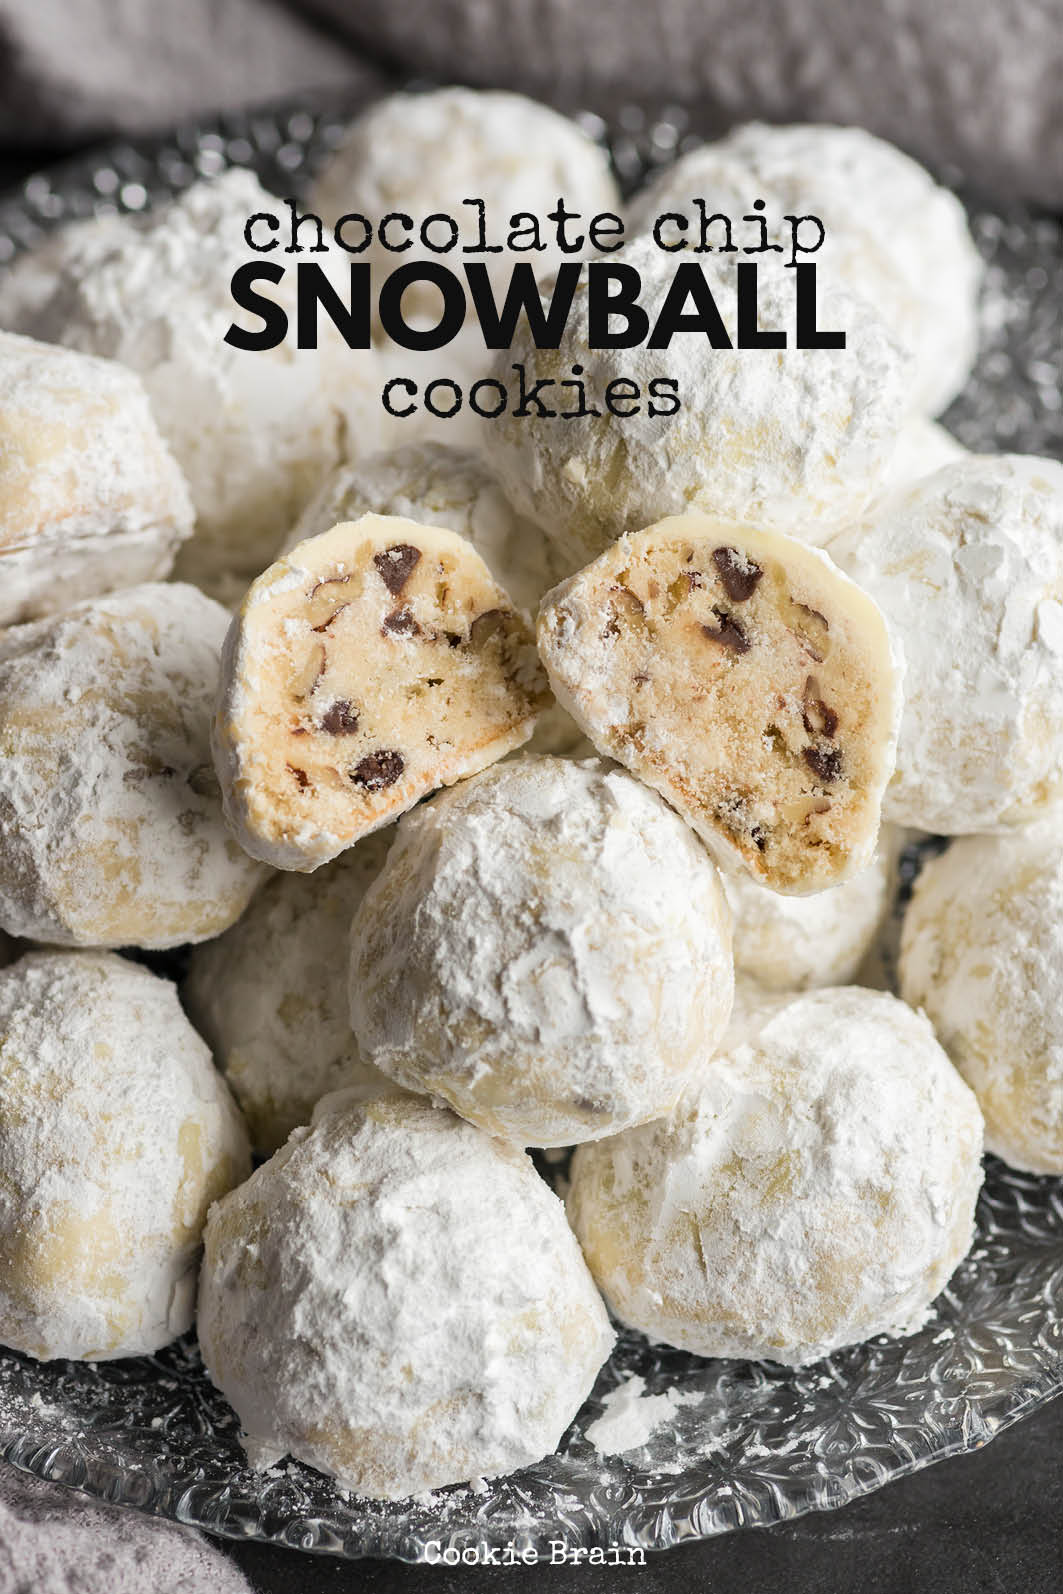 These buttery, melt-in-your-mouth chocolate chip snowball cookies are the perfect winter treat. Whether you call them Russian tea cakes or Mexican wedding cookies, you can call them amazing!